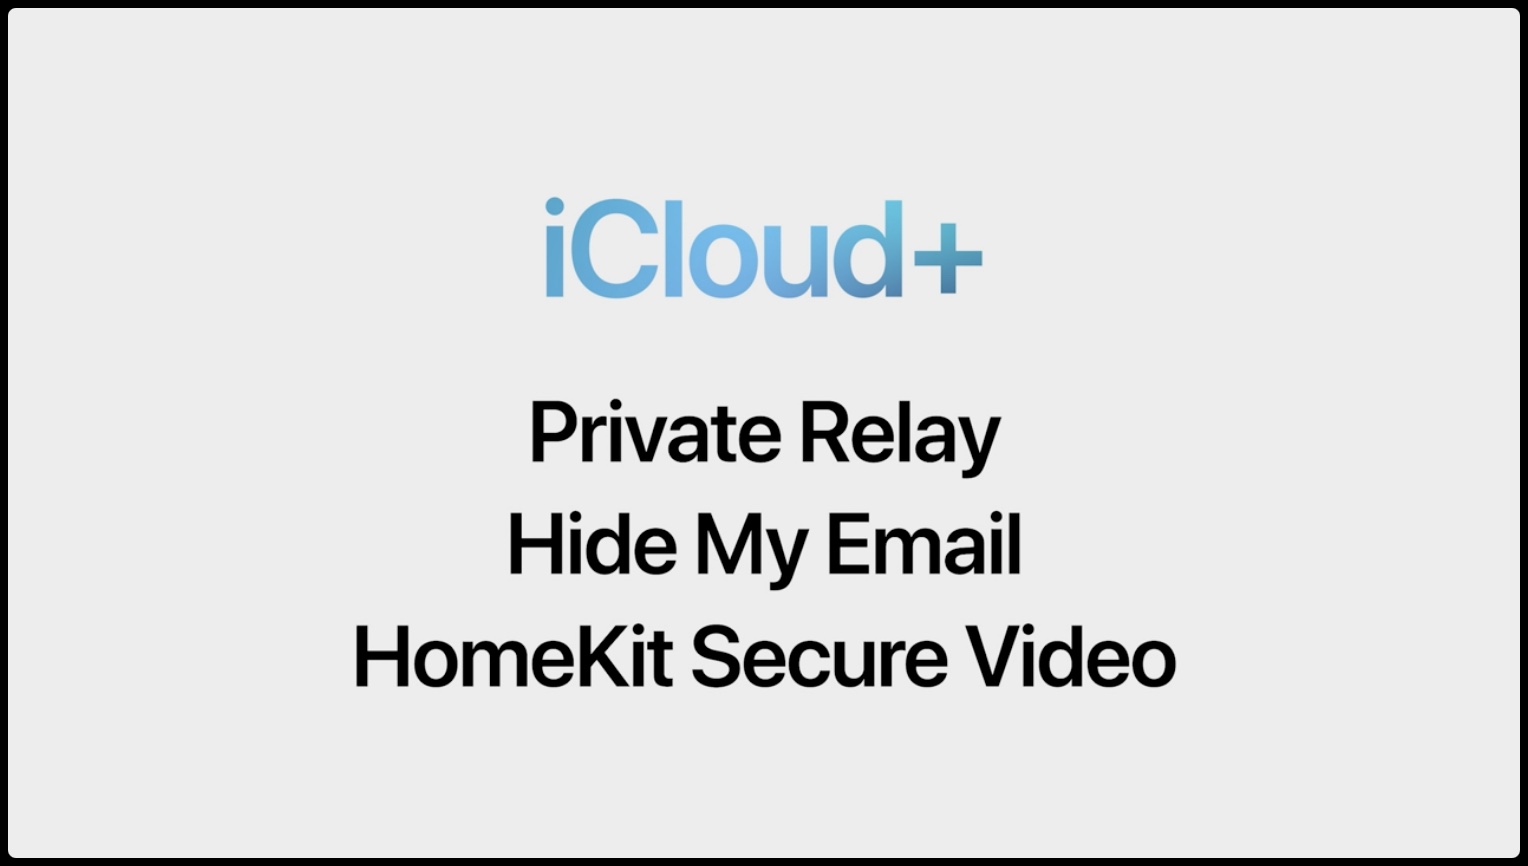 WWDC21 slide listing iCloud+ features like Private Relay, Hide My Email and HomeKit Secure Video